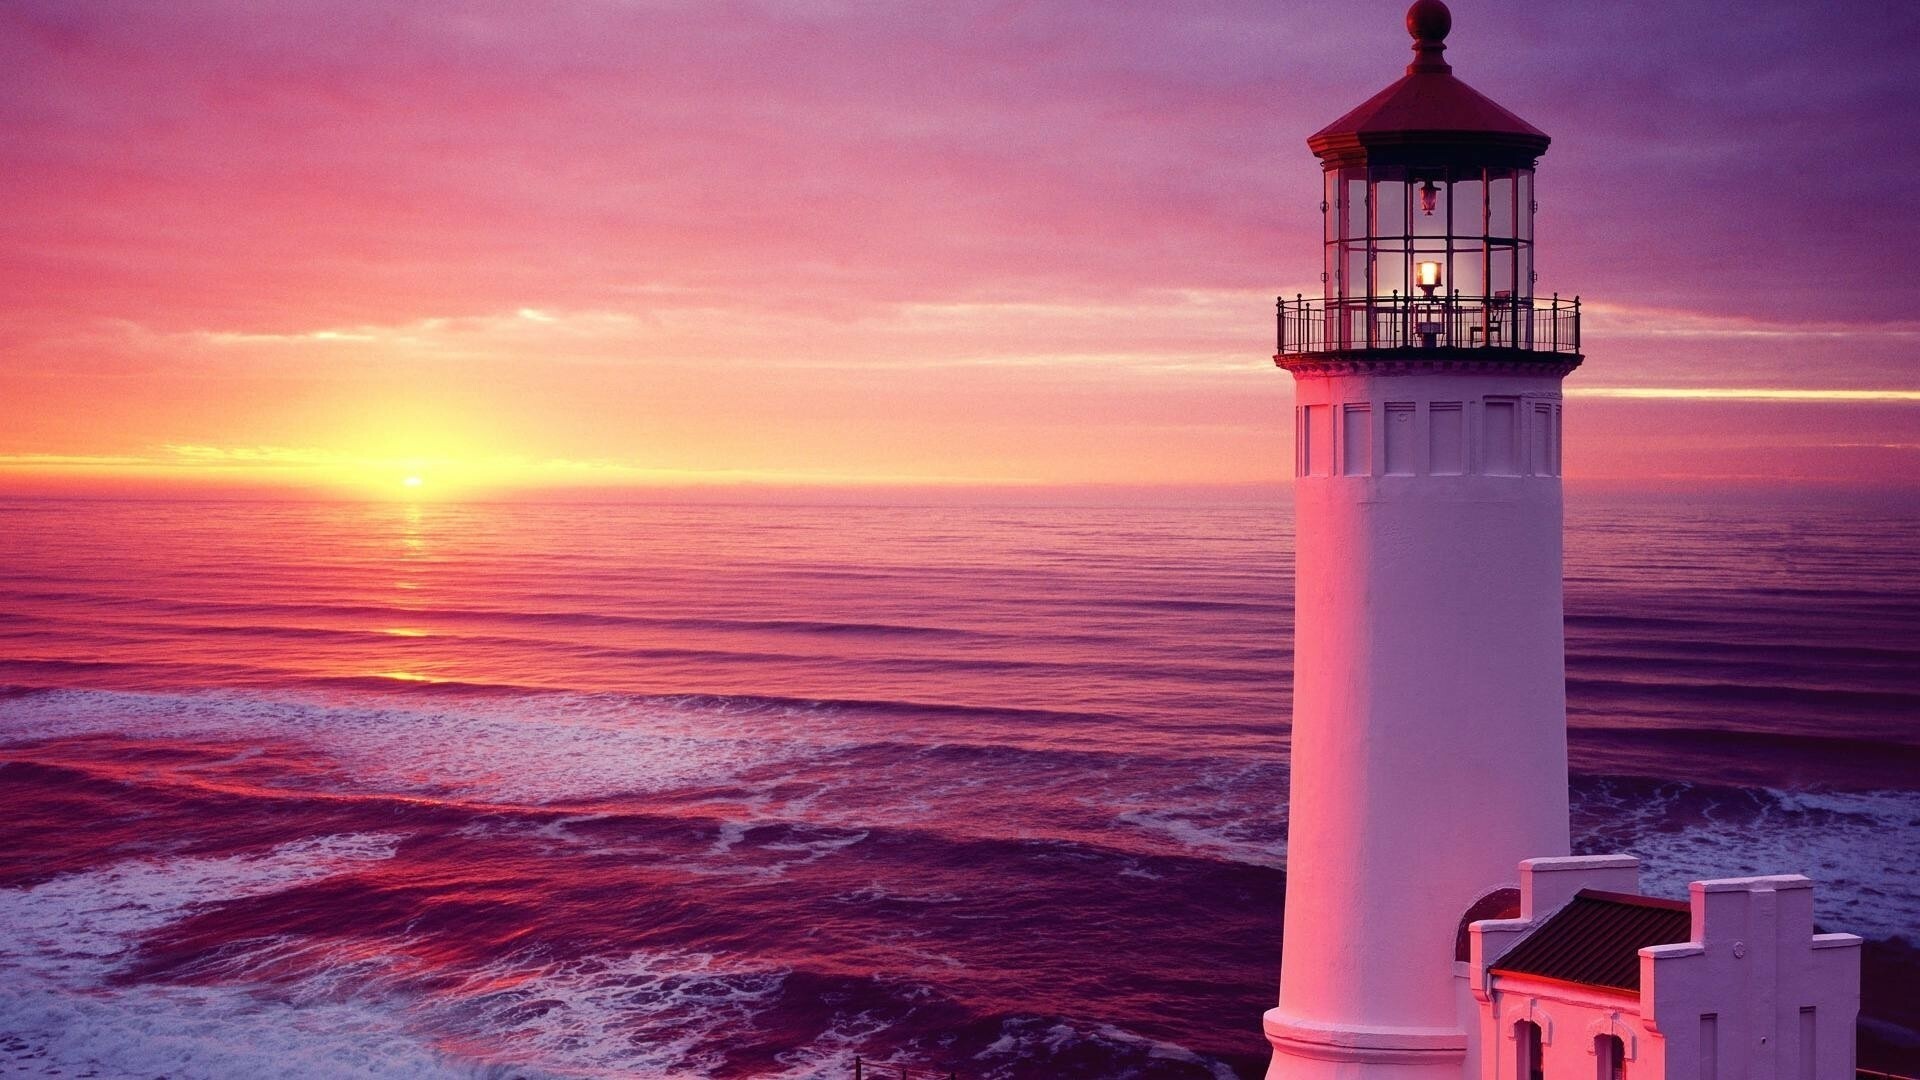 Sunset: The apparent descent of the sun below the horizon, Seascape, Lighthouse. 1920x1080 Full HD Background.